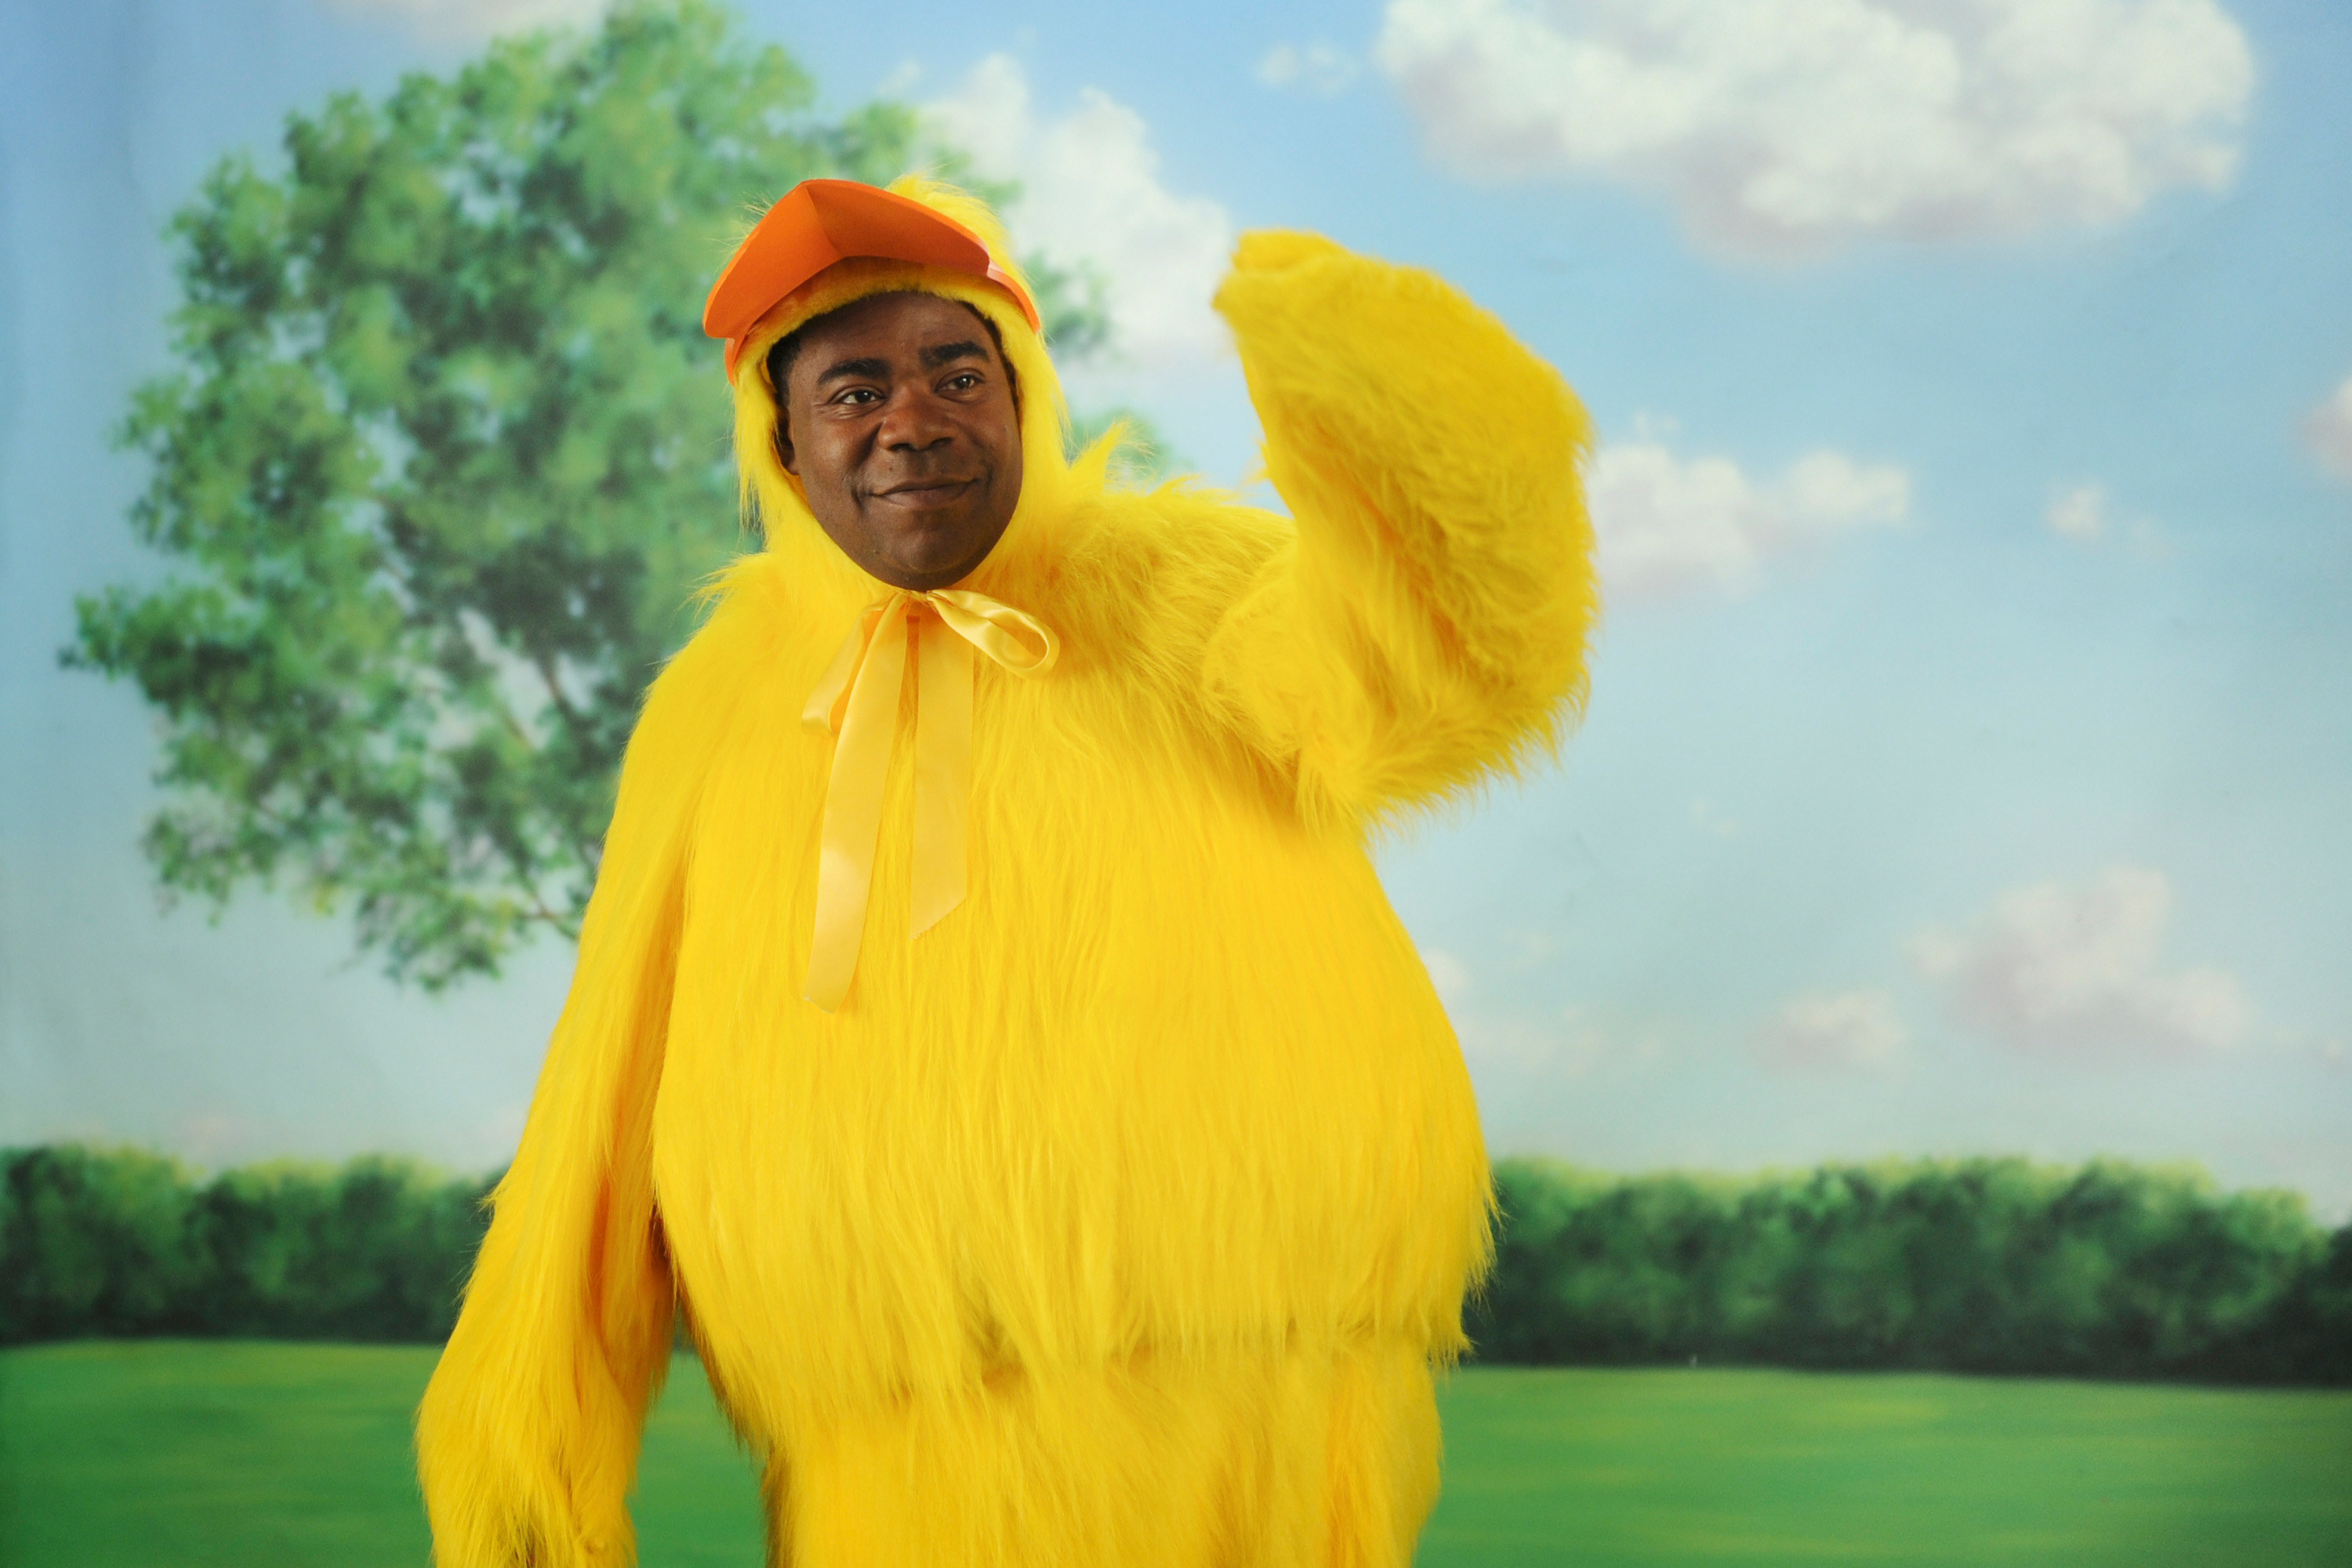 Tracy wore a chicken suit